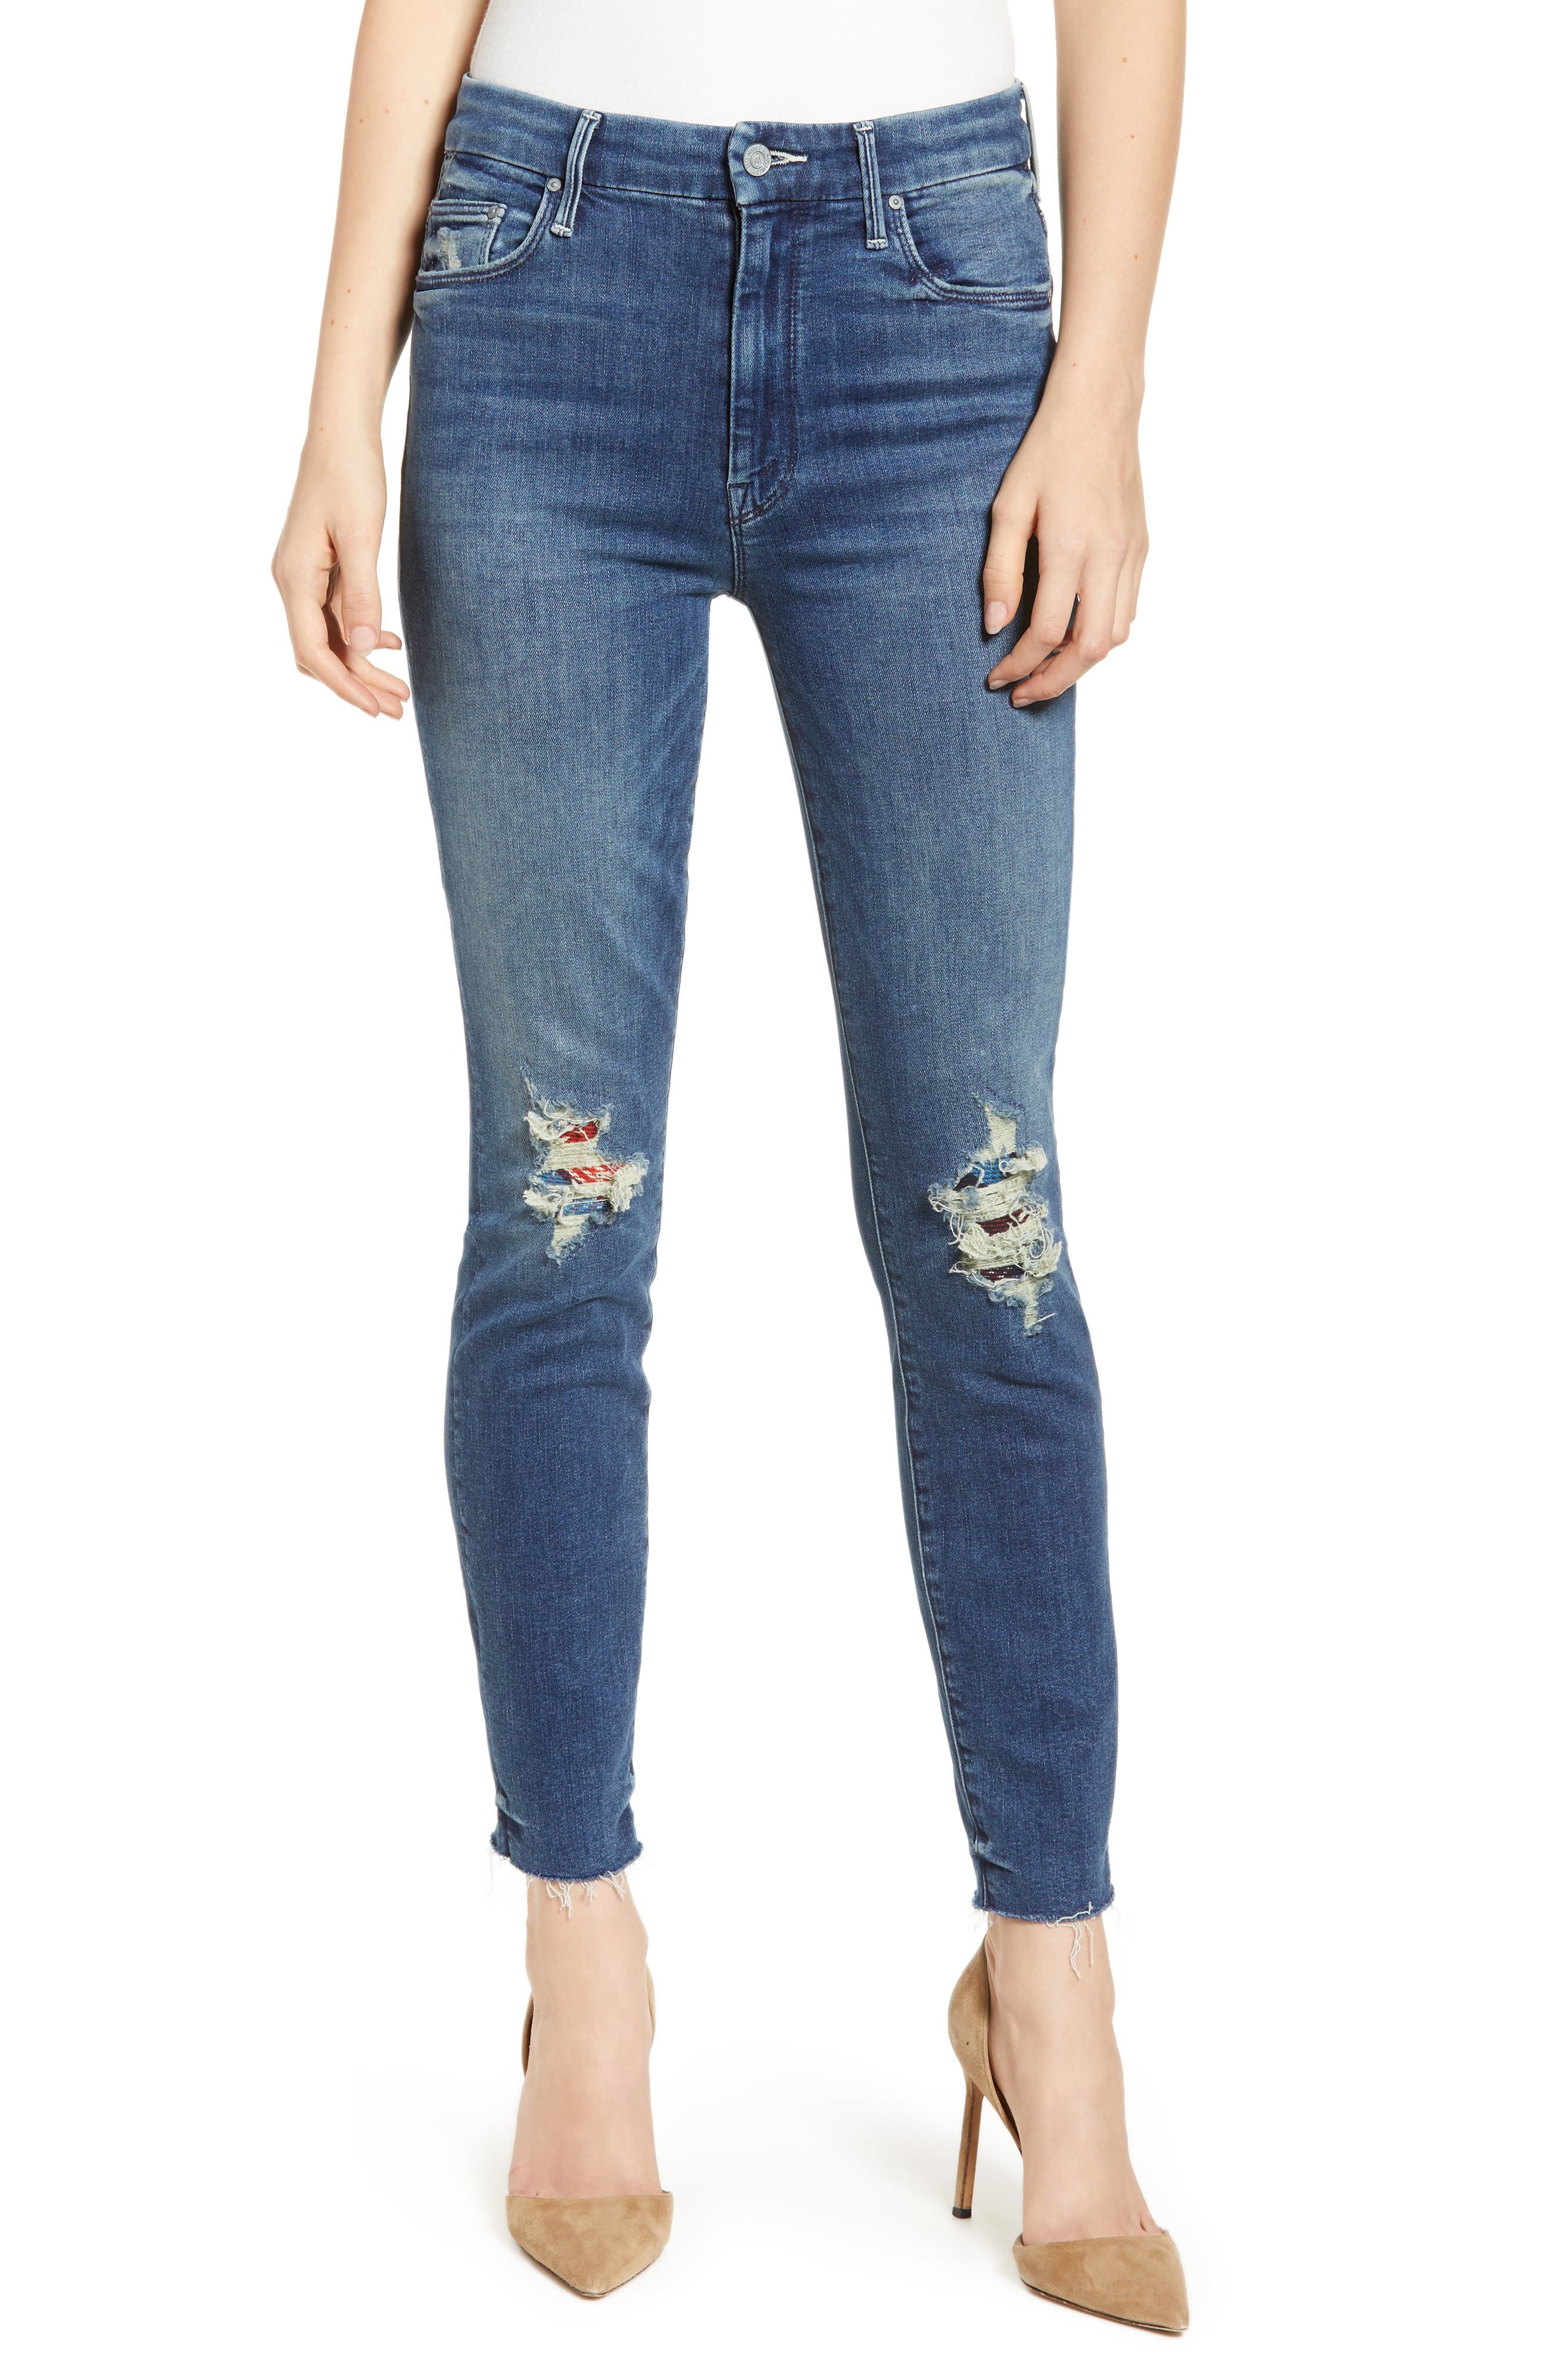 MOTHER | The Looker High Waist Frayed Ankle Skinny Jeans | Nordstrom Rack